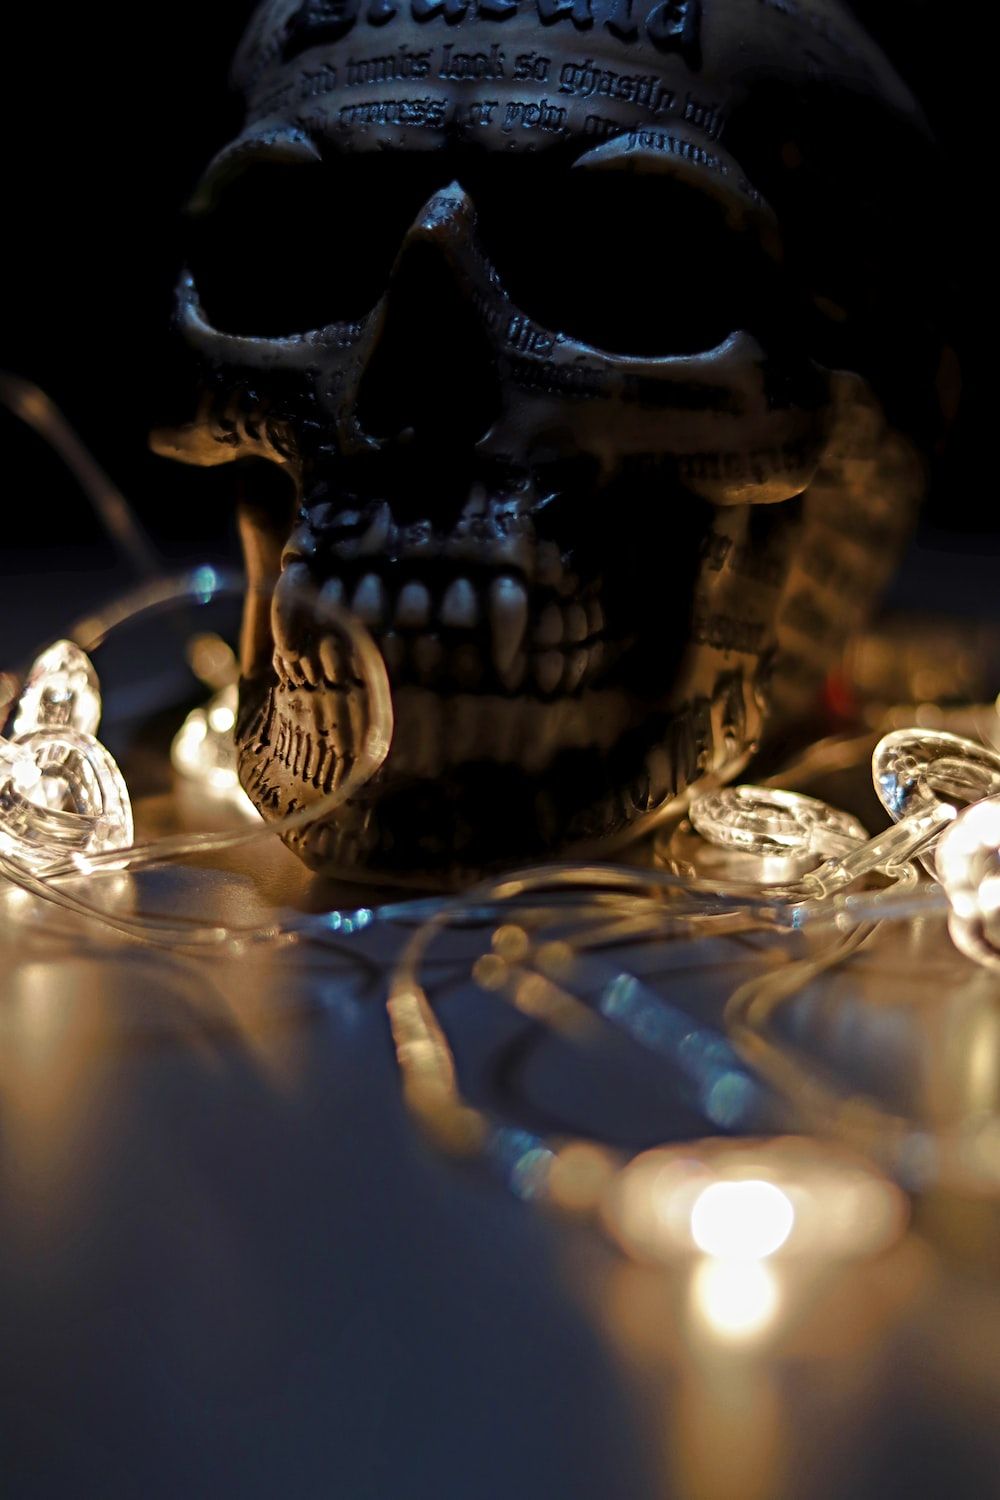 A skull is sitting on top of some lights - Vampire